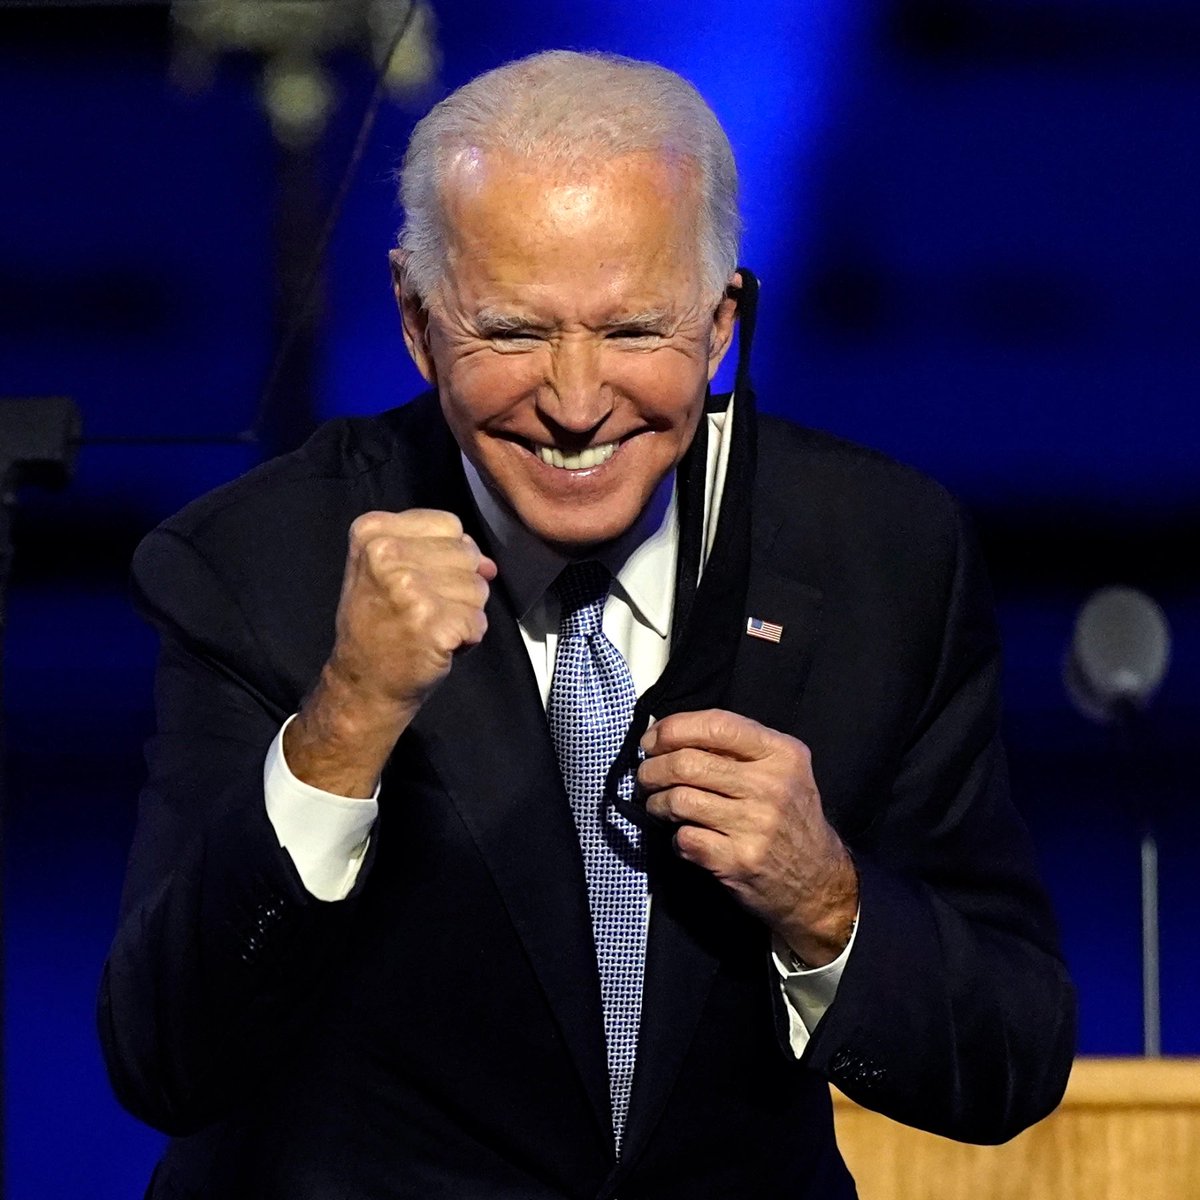 Just In:  democrats wanted SCOTUS to reject Bidens debt deal because it sets them up for 2024!  It appears democrats have outmaneuvered the GOP yet again.  

President Joe Biden has announced he will be using the Higher Educations Act of 1965 to cancel student debt for millions…